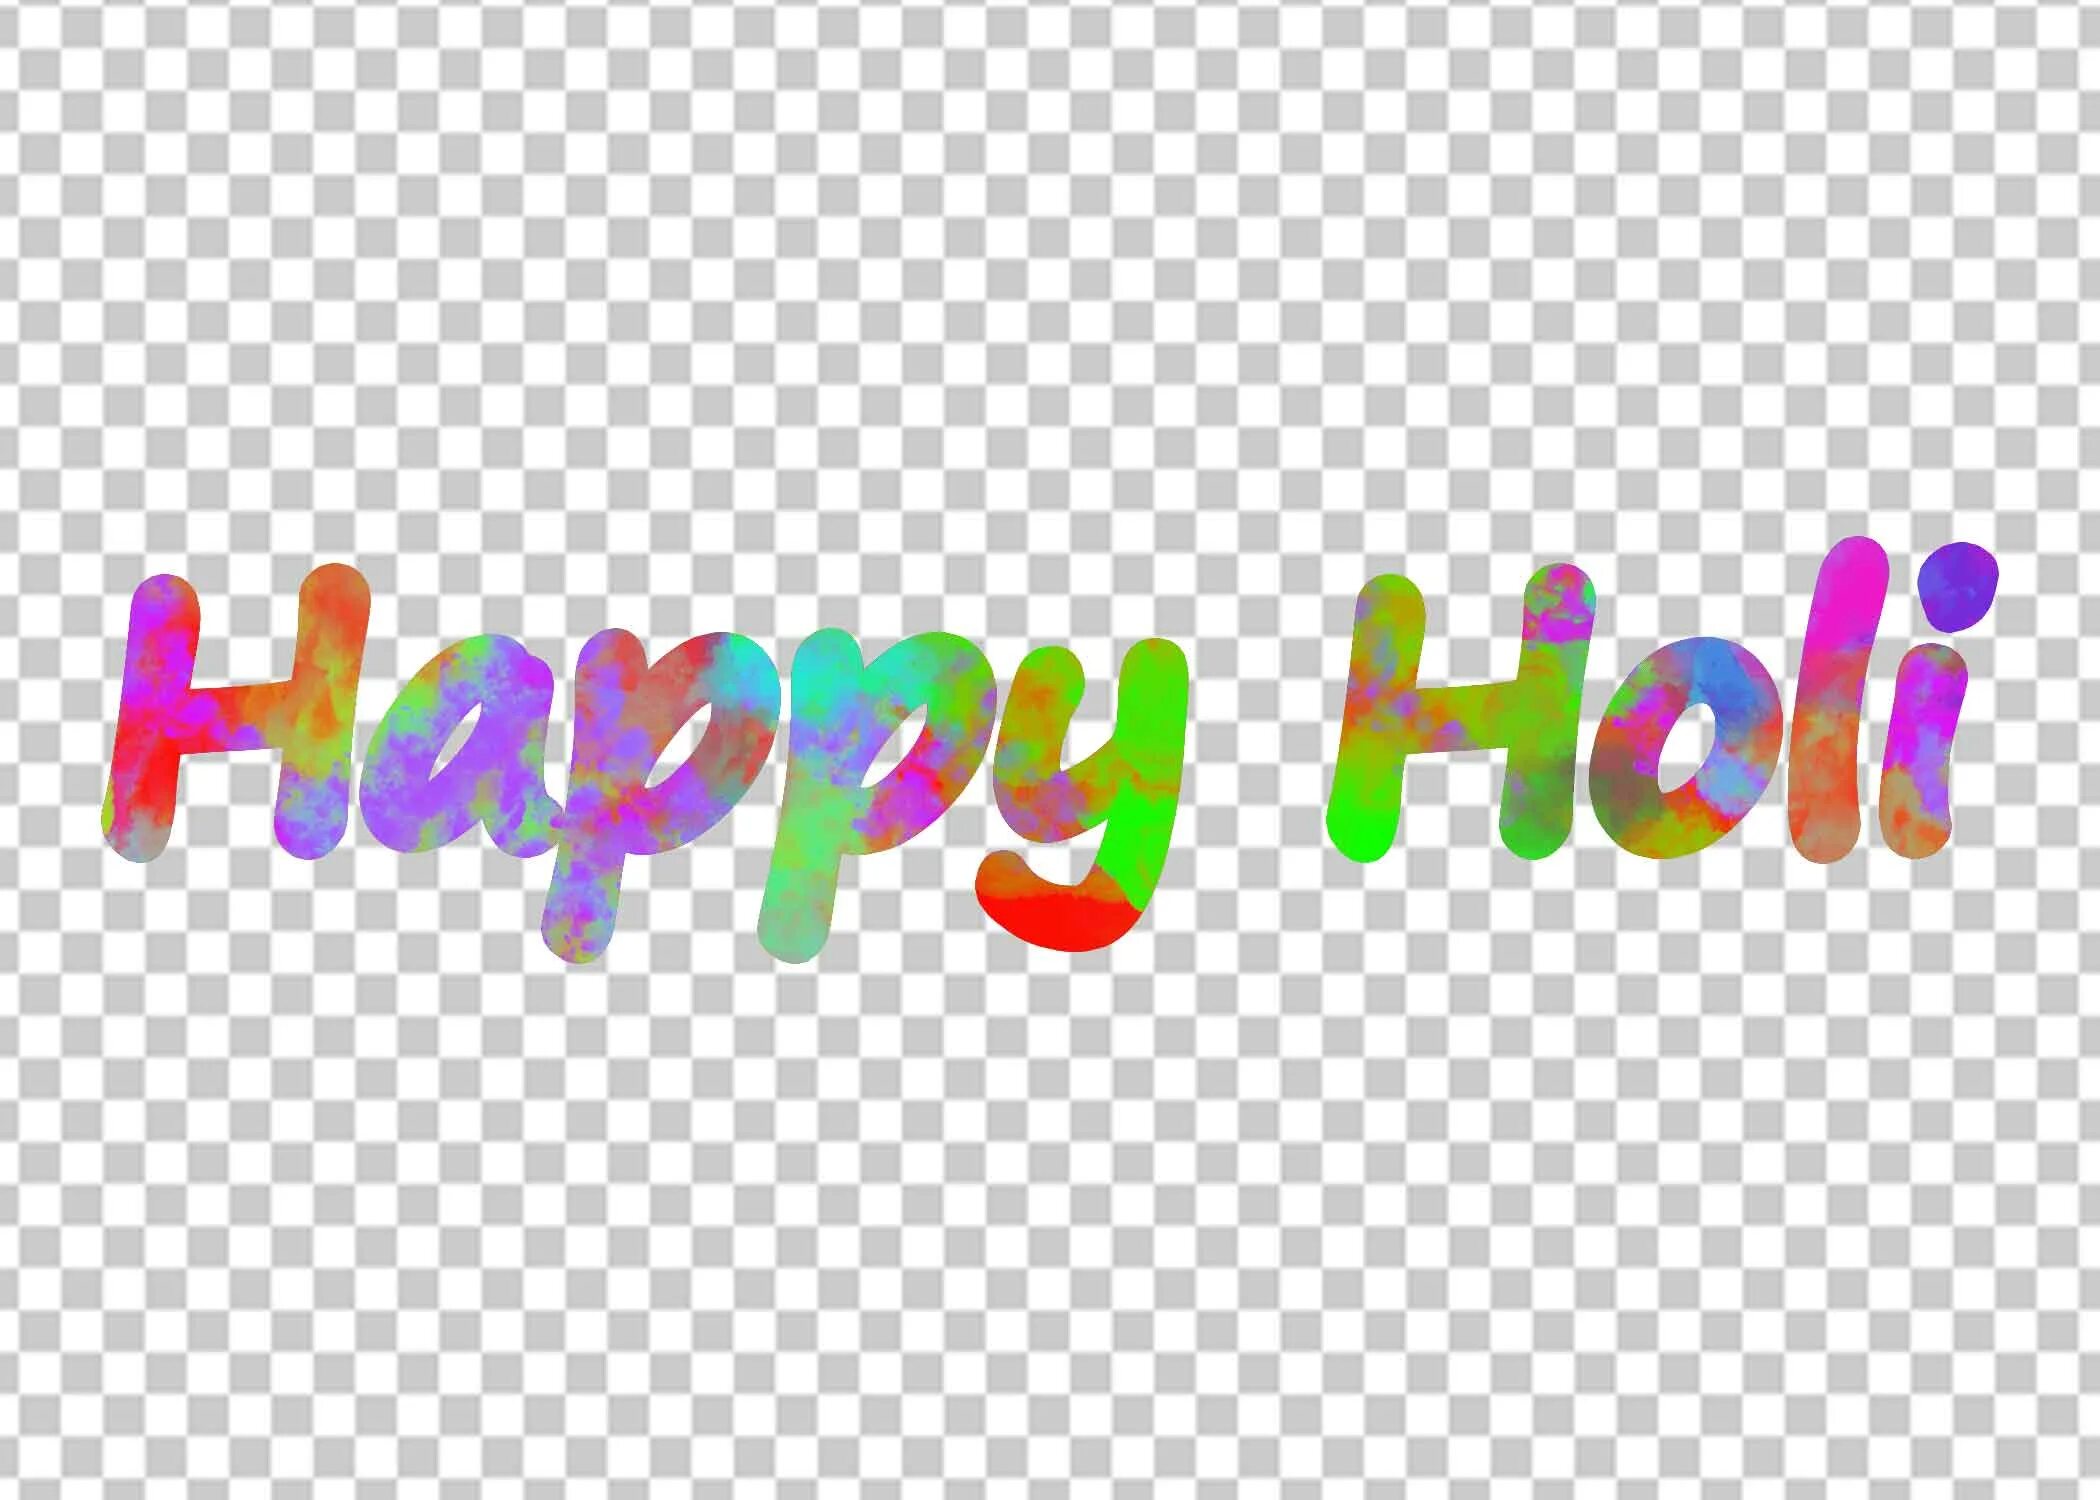 Happy Holi PNG. Colorful text